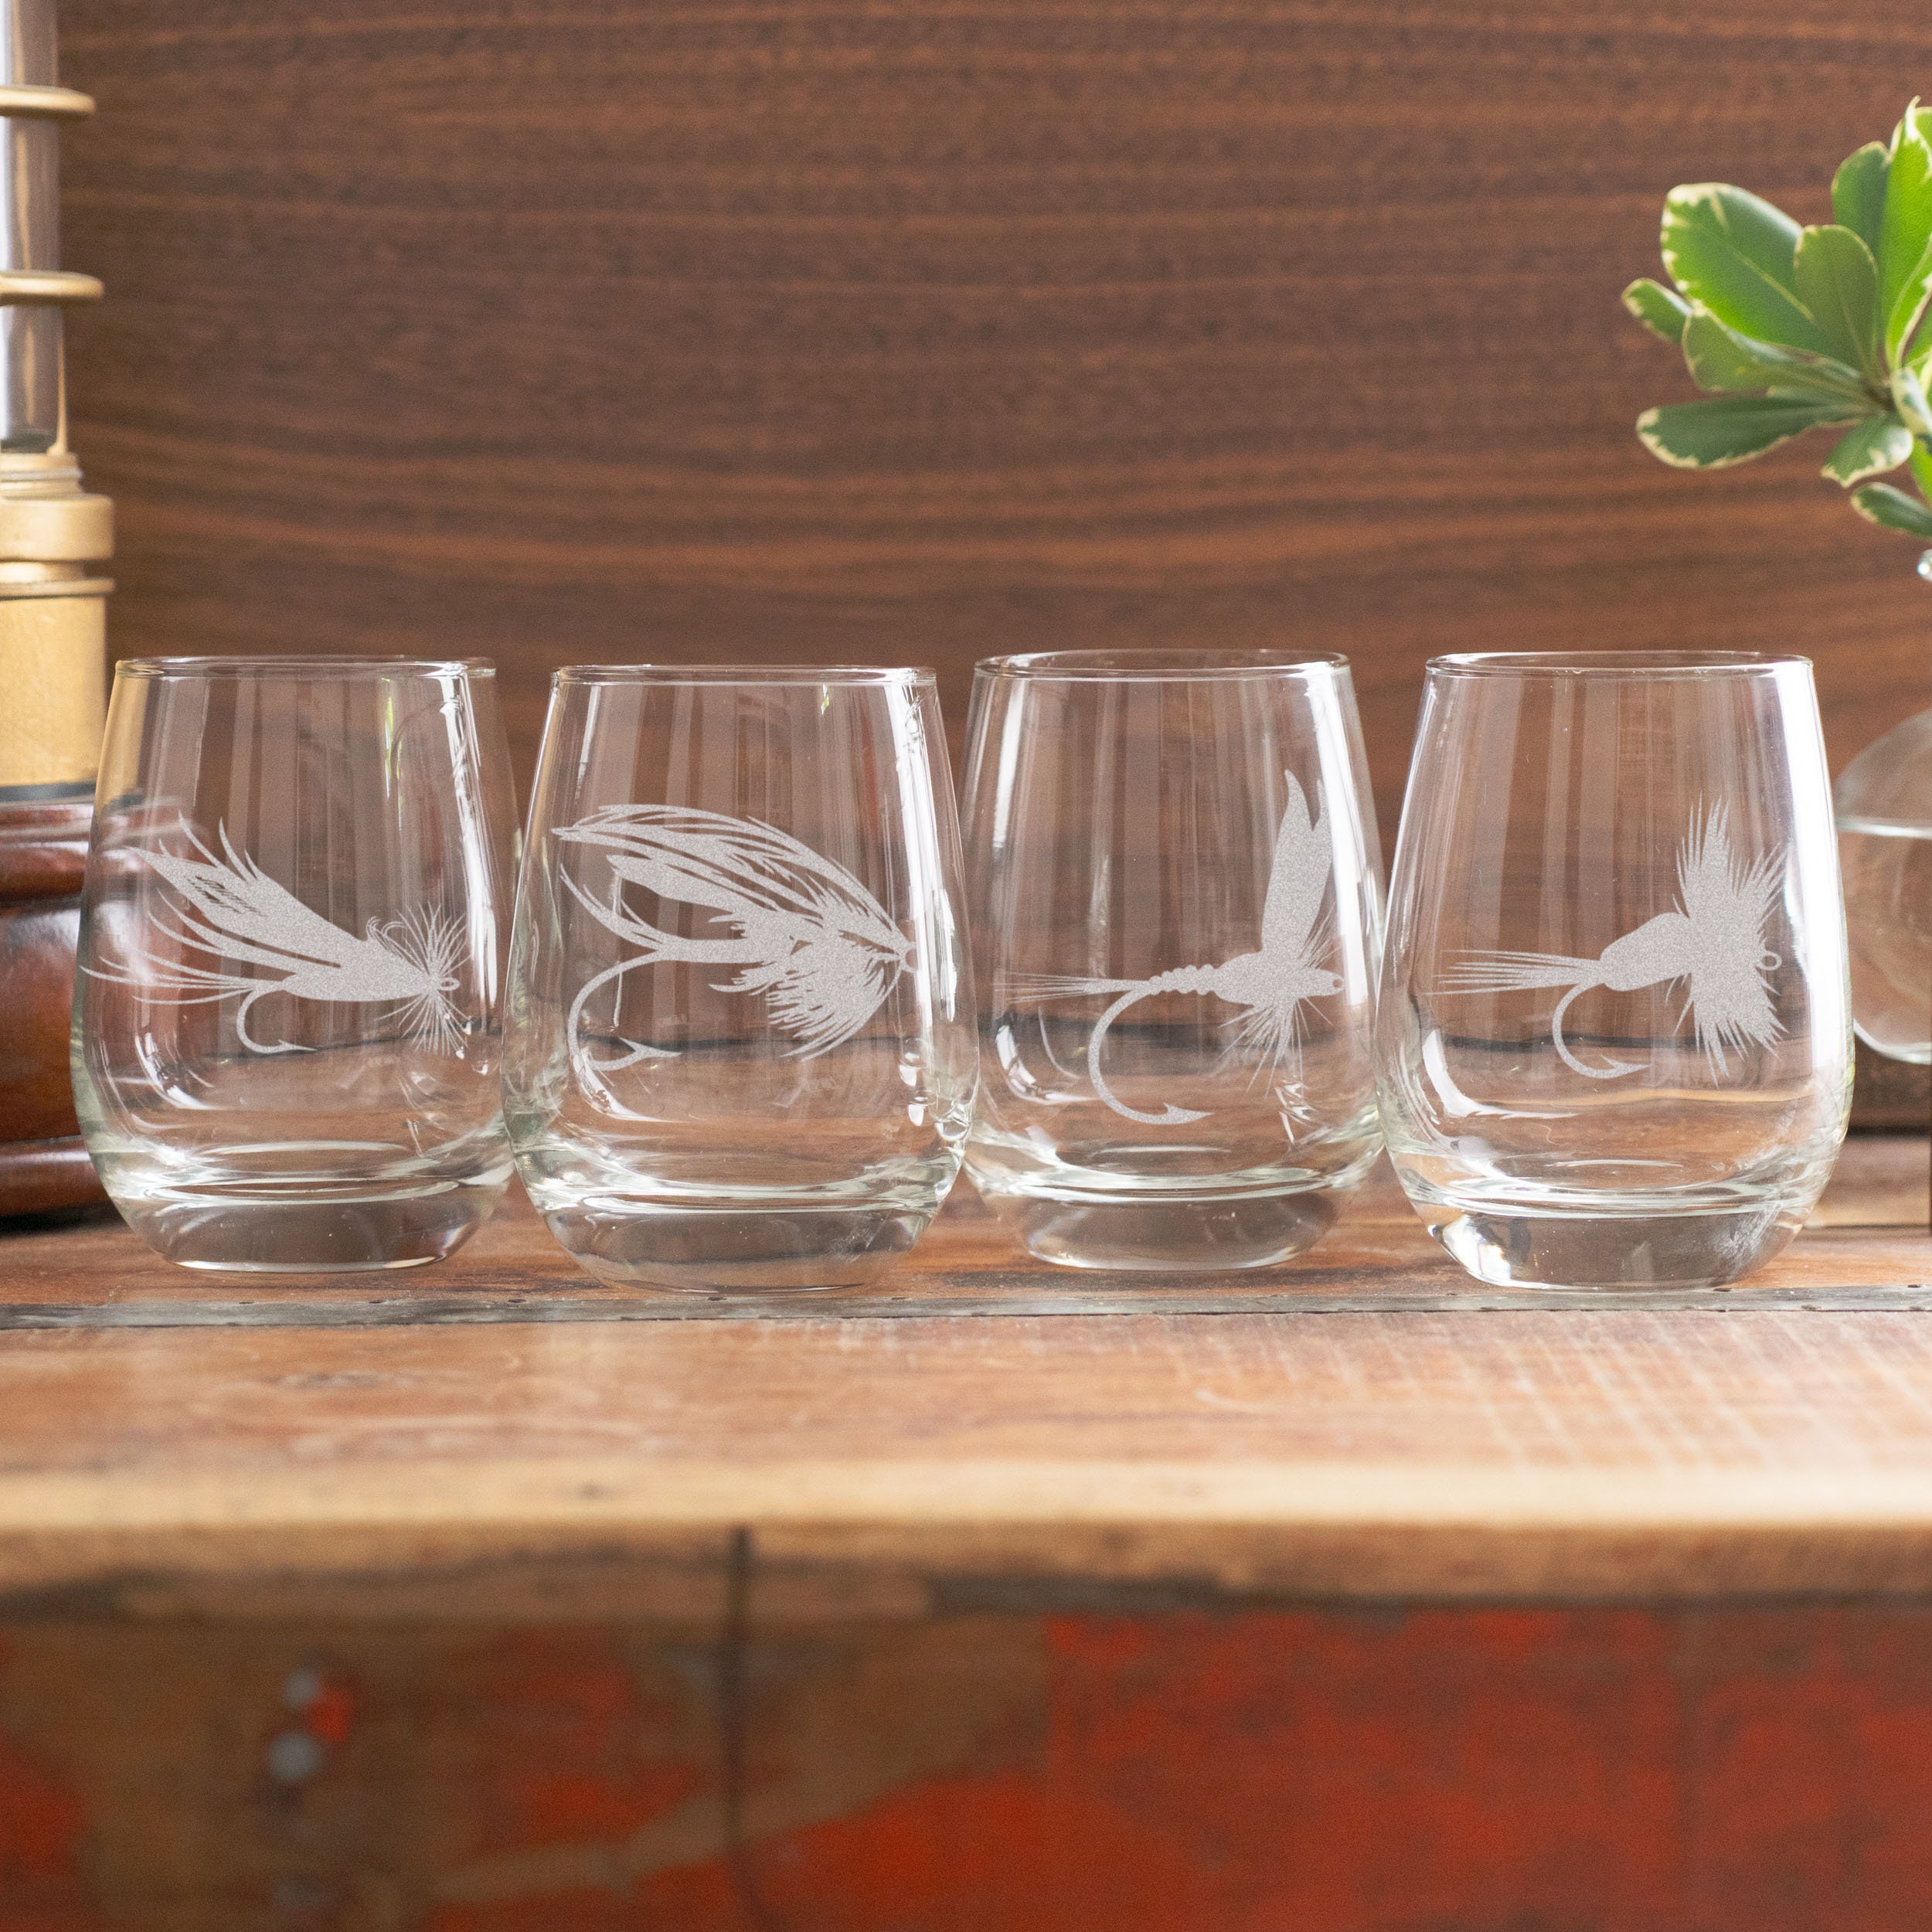 Fly Fishing Lures Glasses Set of 4 Personalized Etched Beer, Cocktail,  Whiskey, Wine Glassware. Fishing Angler Gift. Fisherman Lake Camp. 